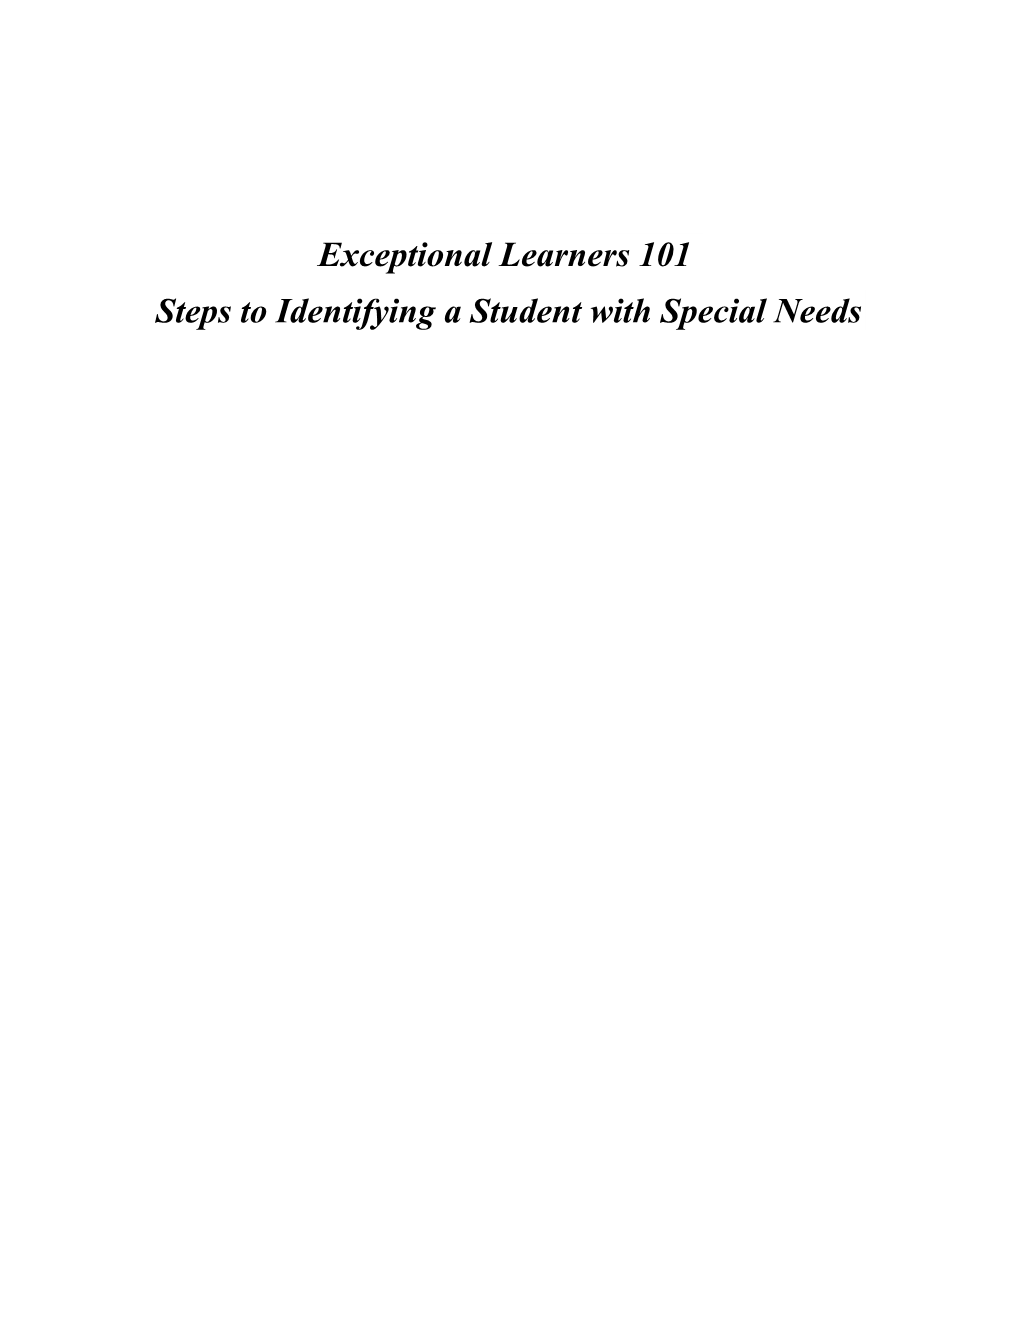 Steps to Identifying a Student with Special Needs